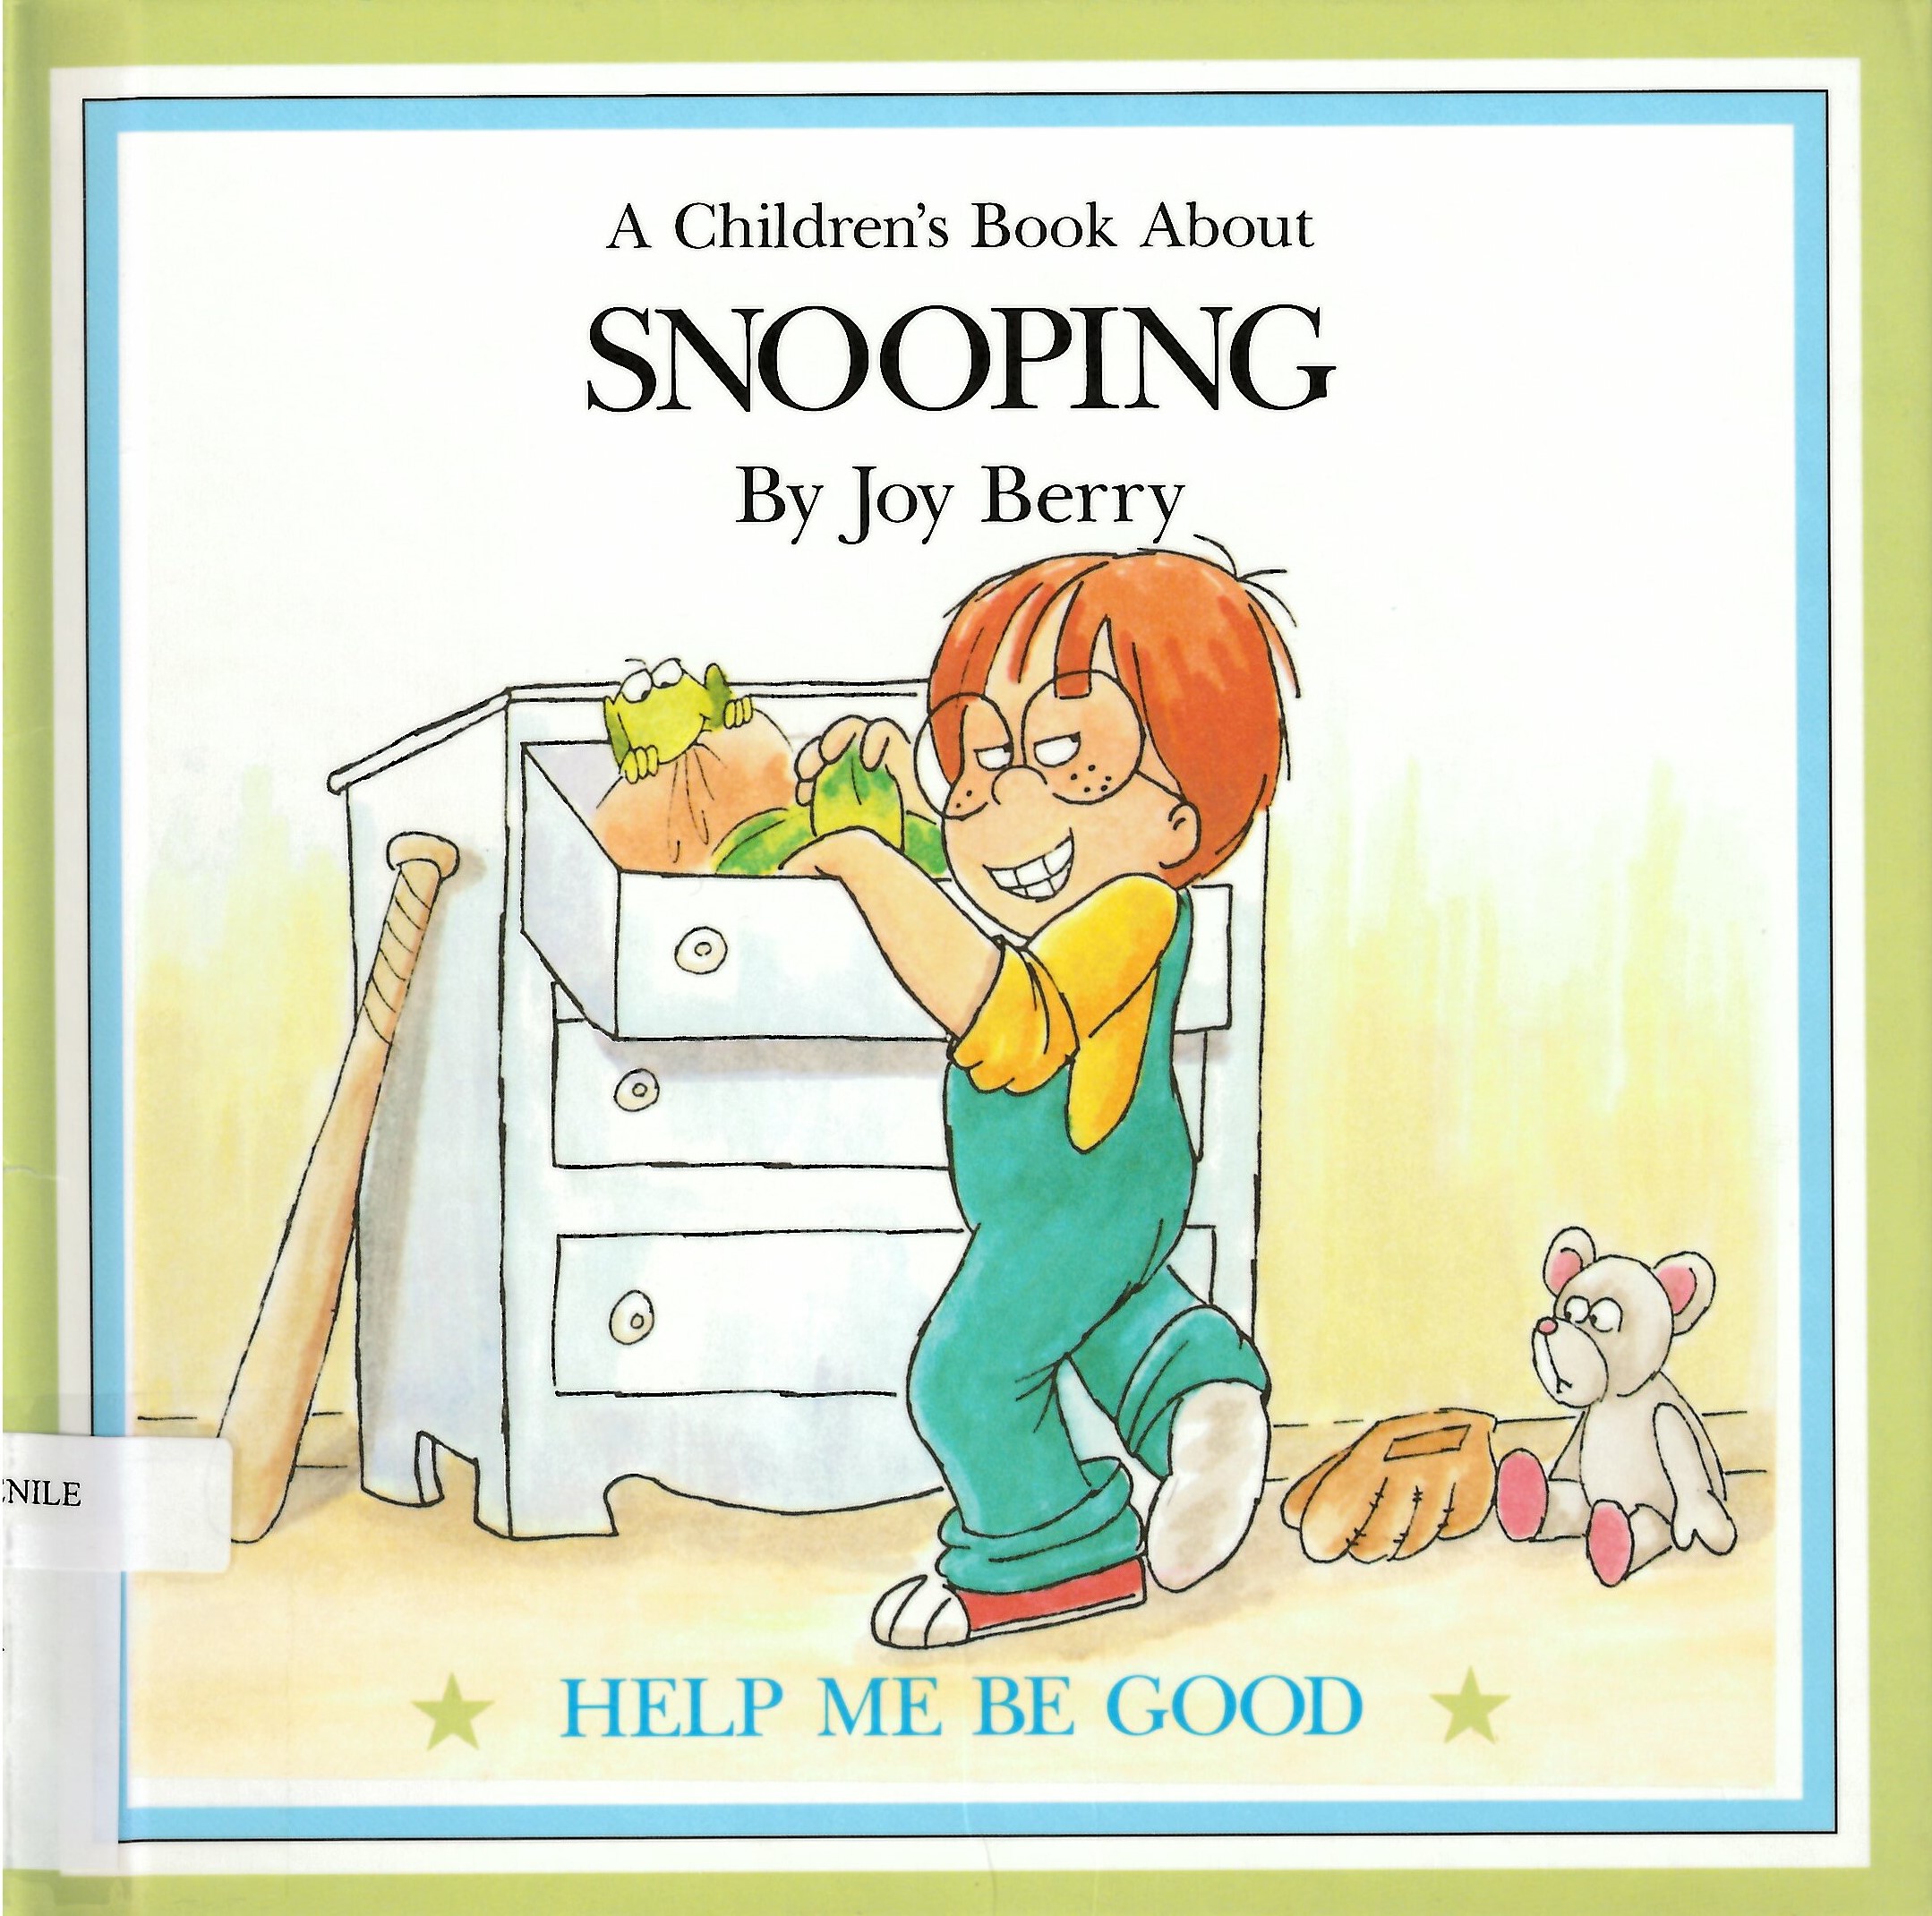 A children's book about snooping